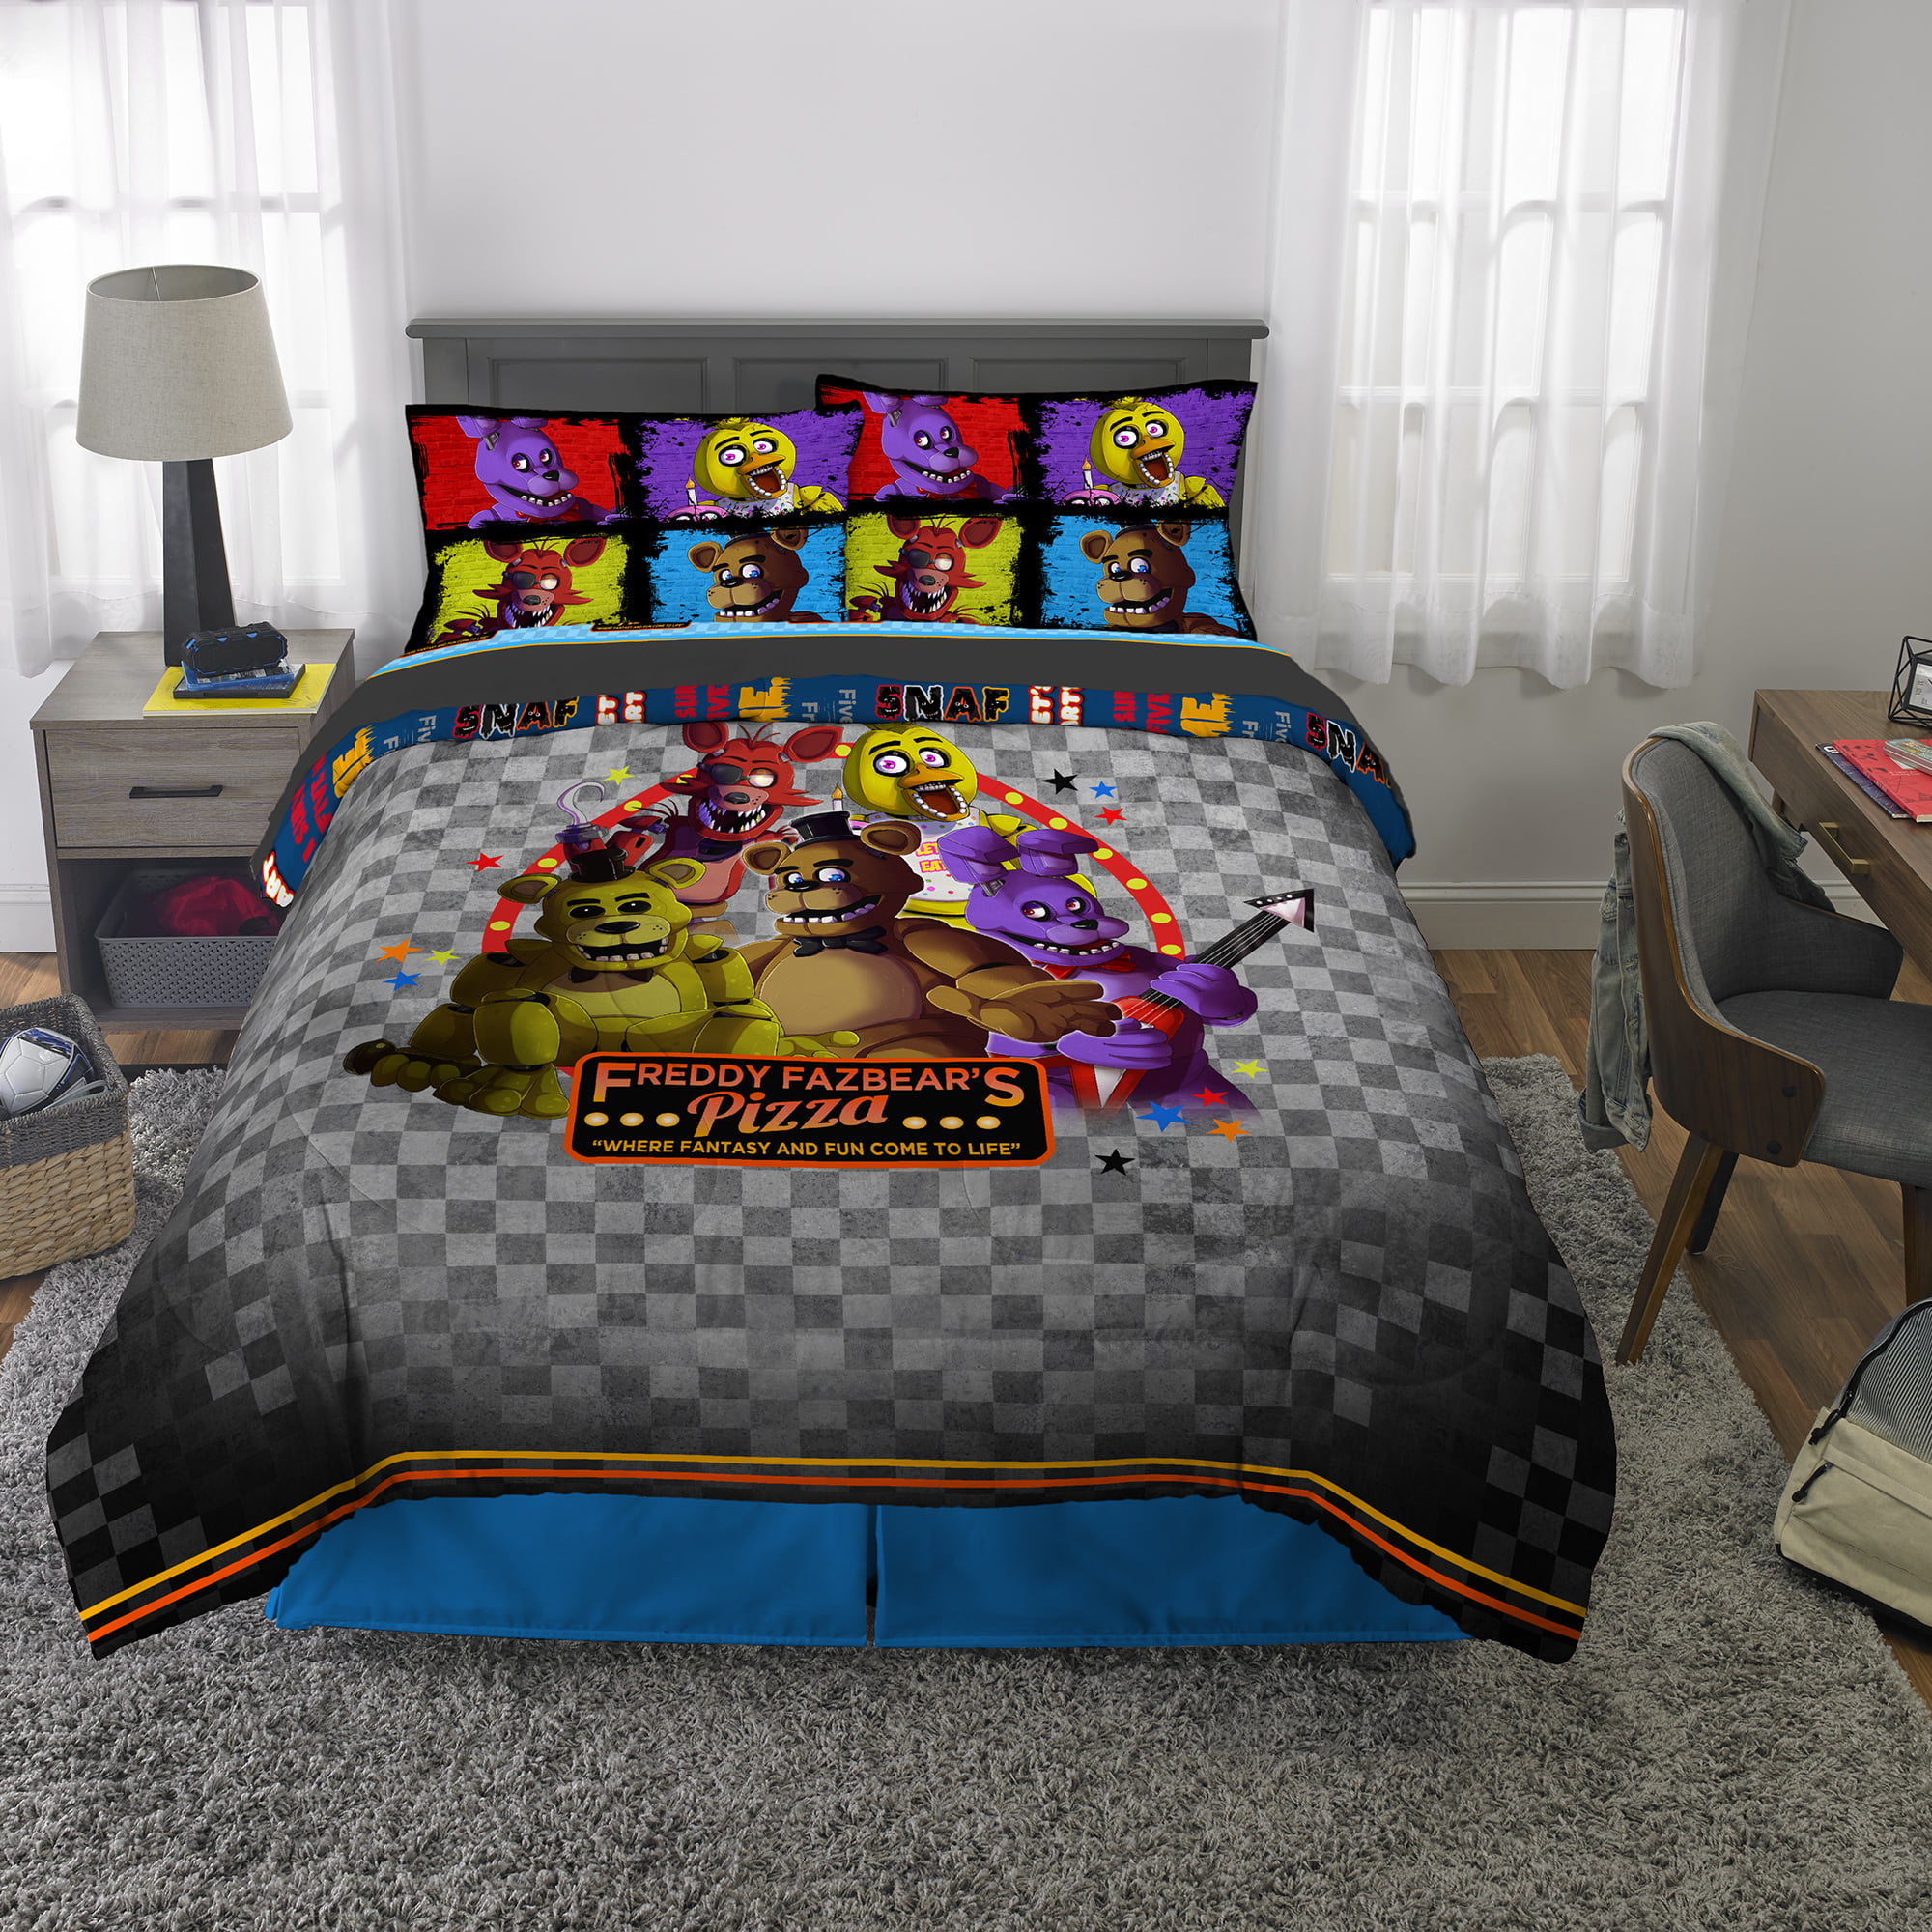 Supstar Kids Bed Sets Bedding Boys Twin Five Nights at Freddys Comforter Cover 3 Pieces Including 1 Duvet Cover and 2 Pillowcase FNAF 7 